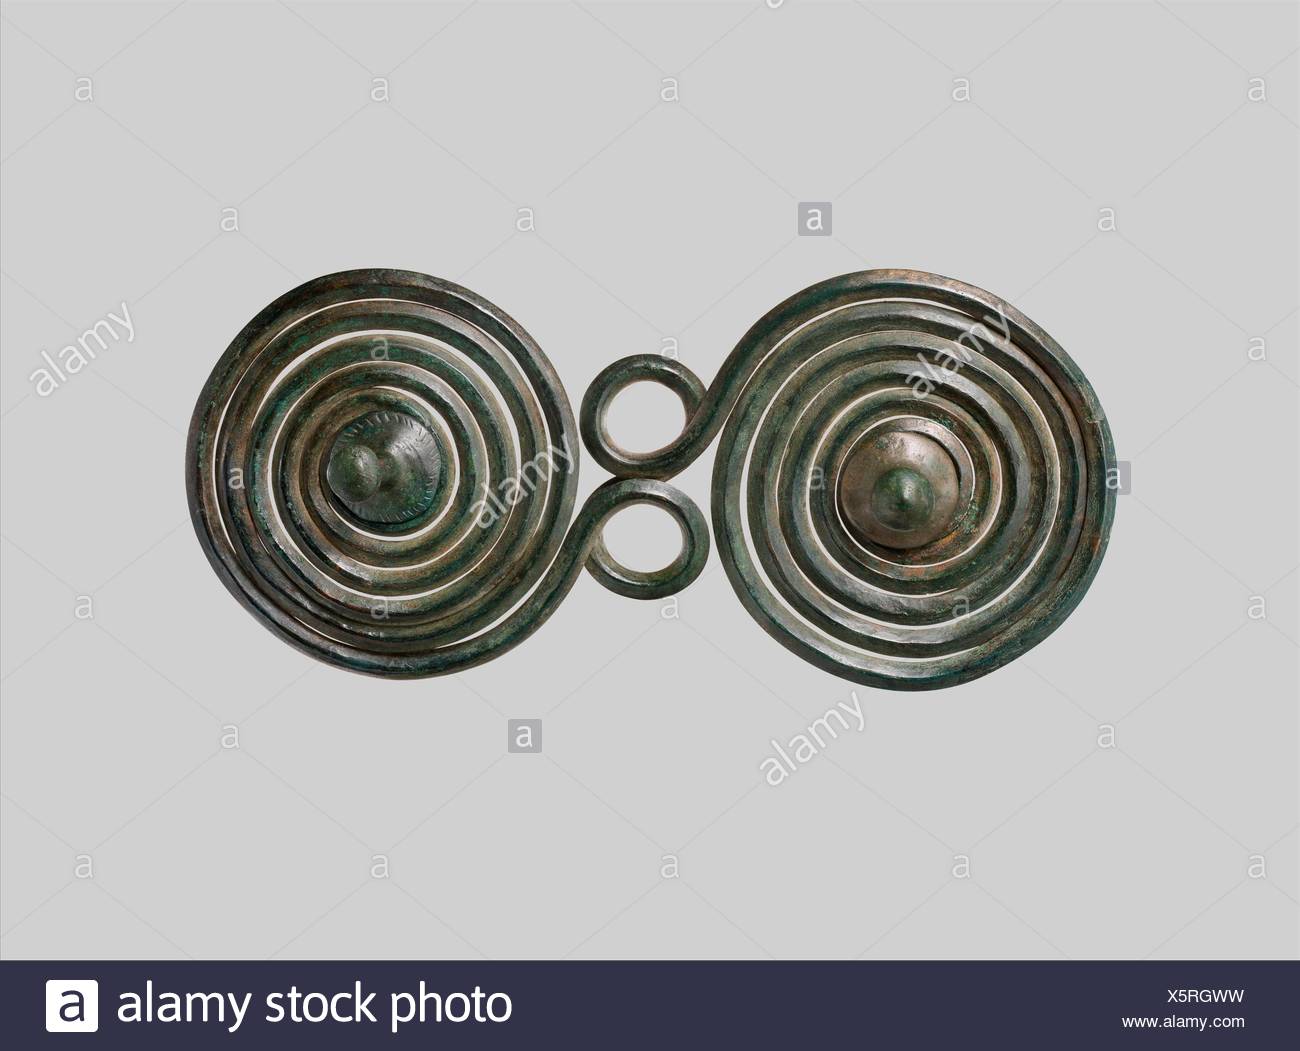 Large Brooch with Spirals. Date: 1400-1100 B.C; Culture: European Bronze  Age; Medium: Copper alloy; Dimensions: Overall: 10 3/16 x 4 1/2 x 3 1/16 in  Stock Photo - Alamy